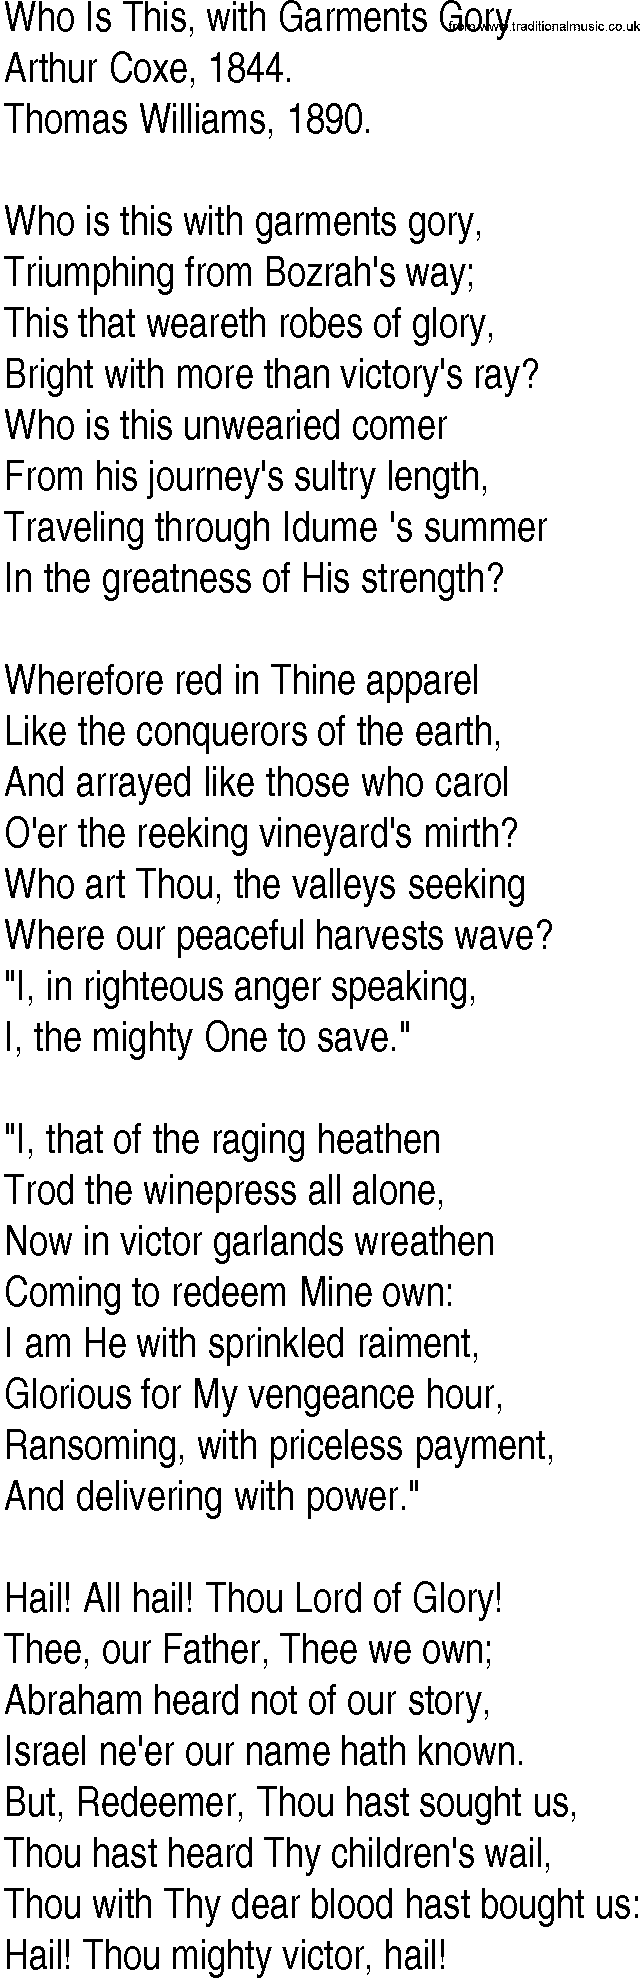 Hymn and Gospel Song: Who Is This, with Garments Gory by Arthur Coxe lyrics